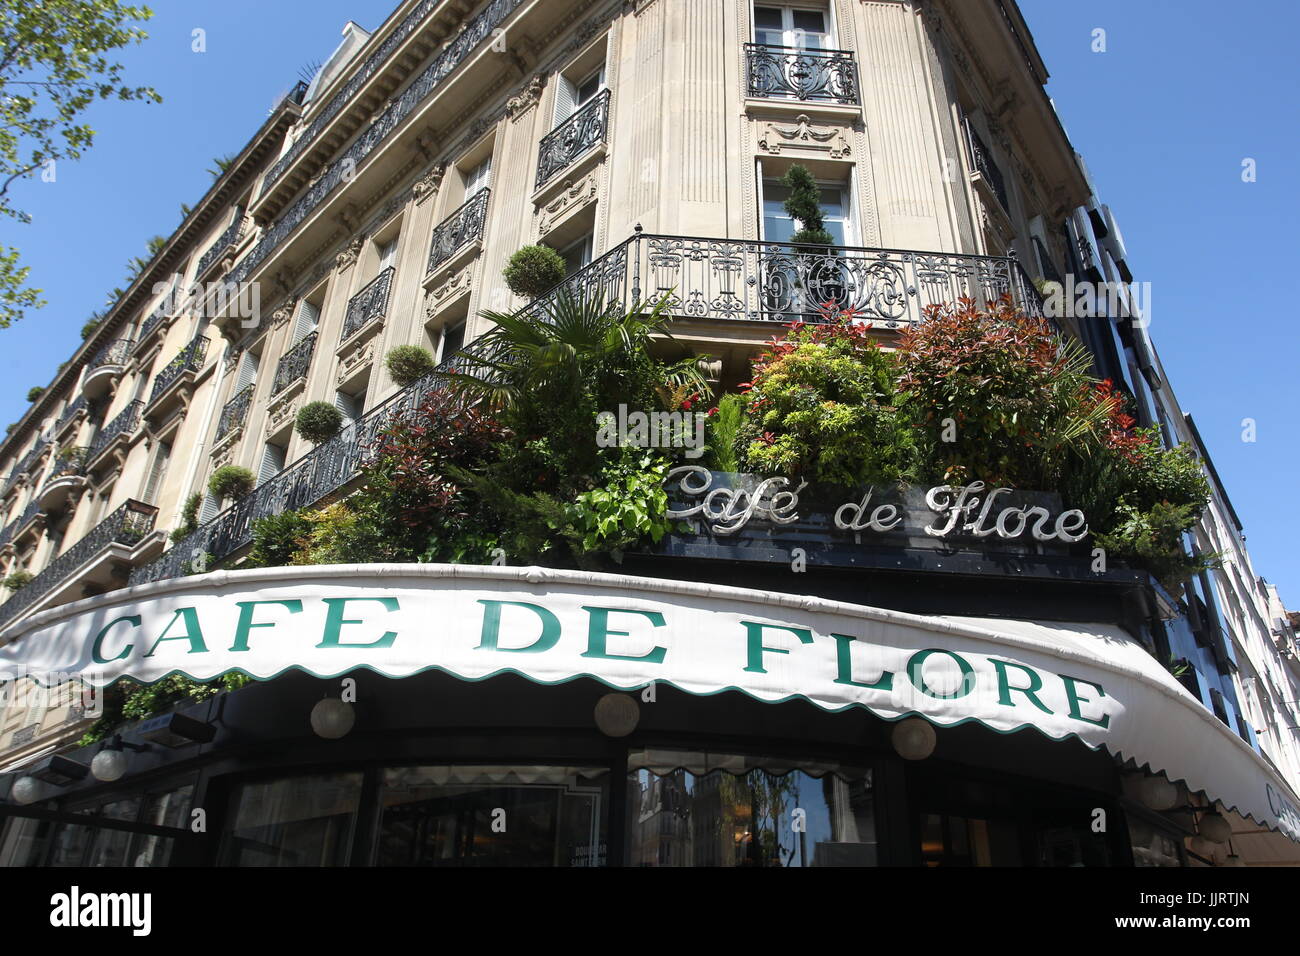 The Cafe de Flore  is one of the oldest coffeehouses in Paris. Located on Boulevard Saint-Germain it's a famous hangout for artists and writers. Stock Photo